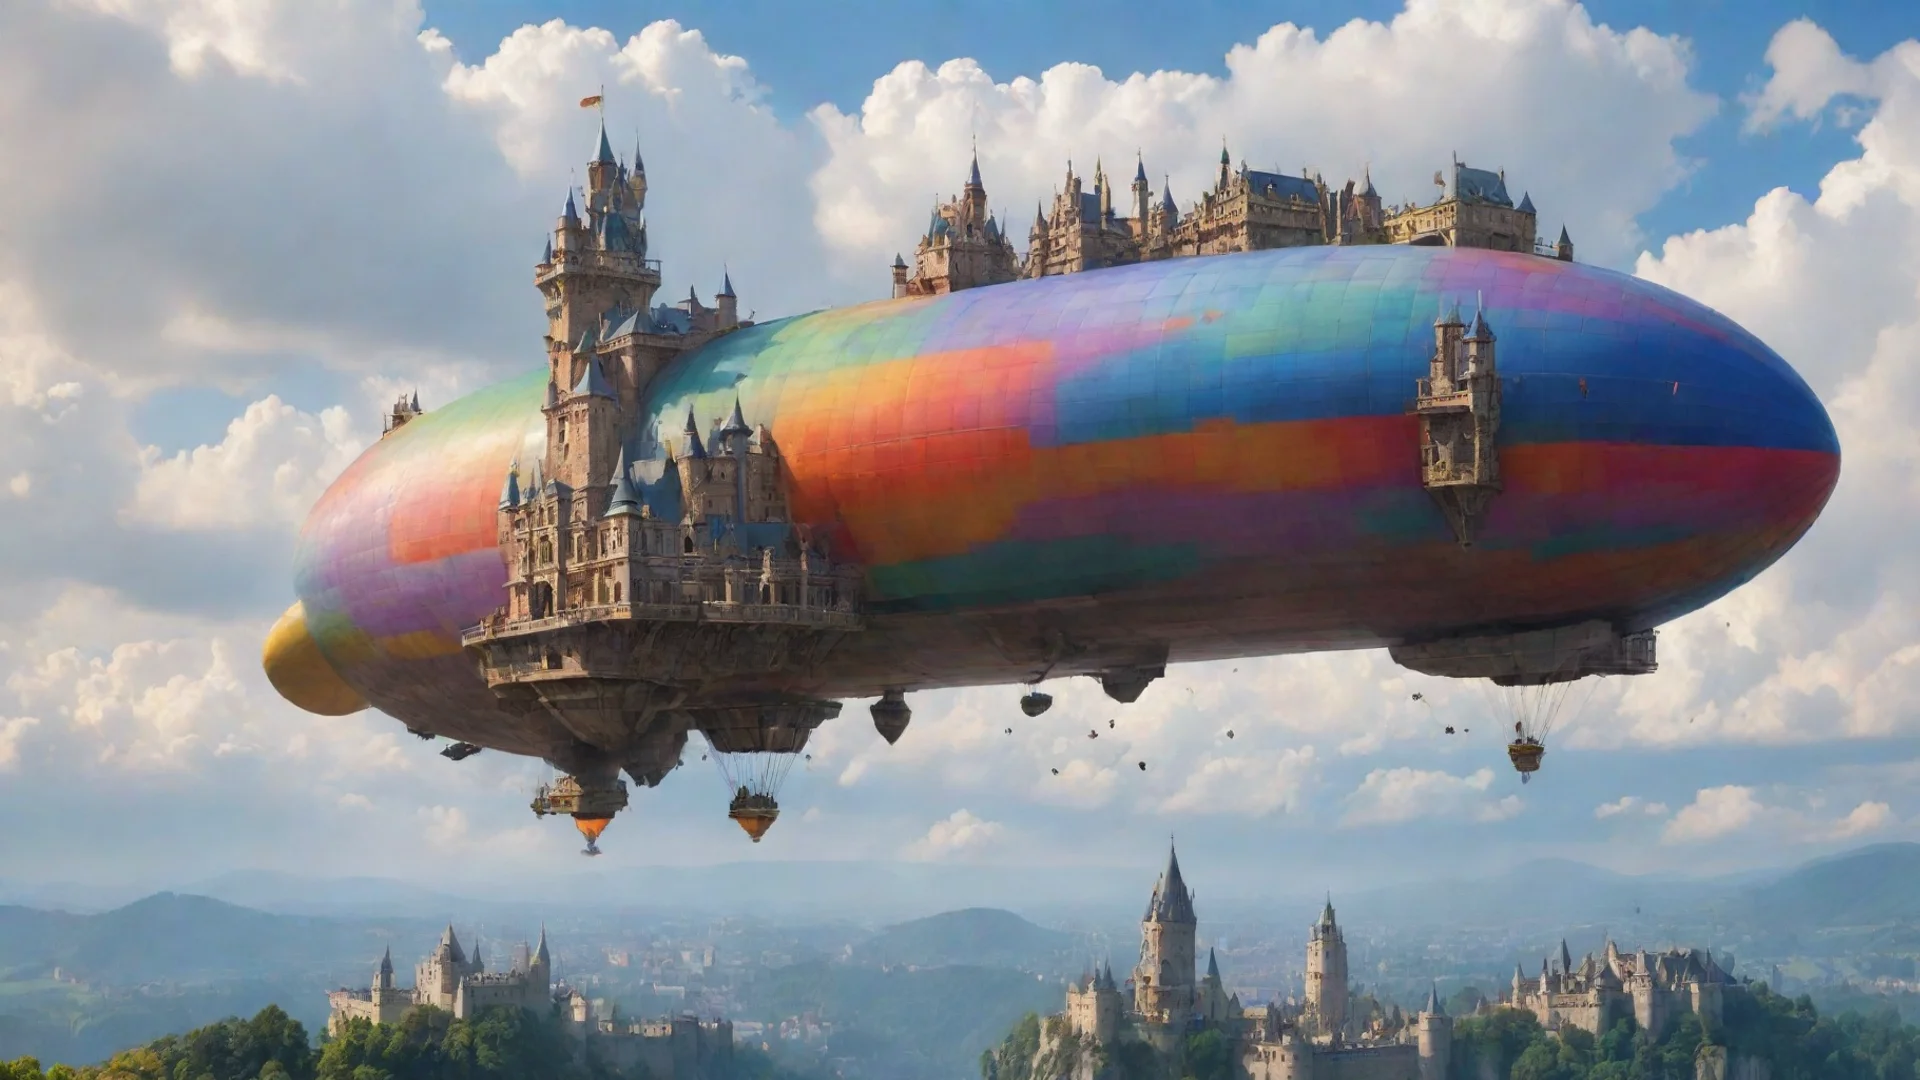 trending castle in sky amazing awesome architectural masterpiece wow hd colorful world floating blimp good looking fantastic 1 wide